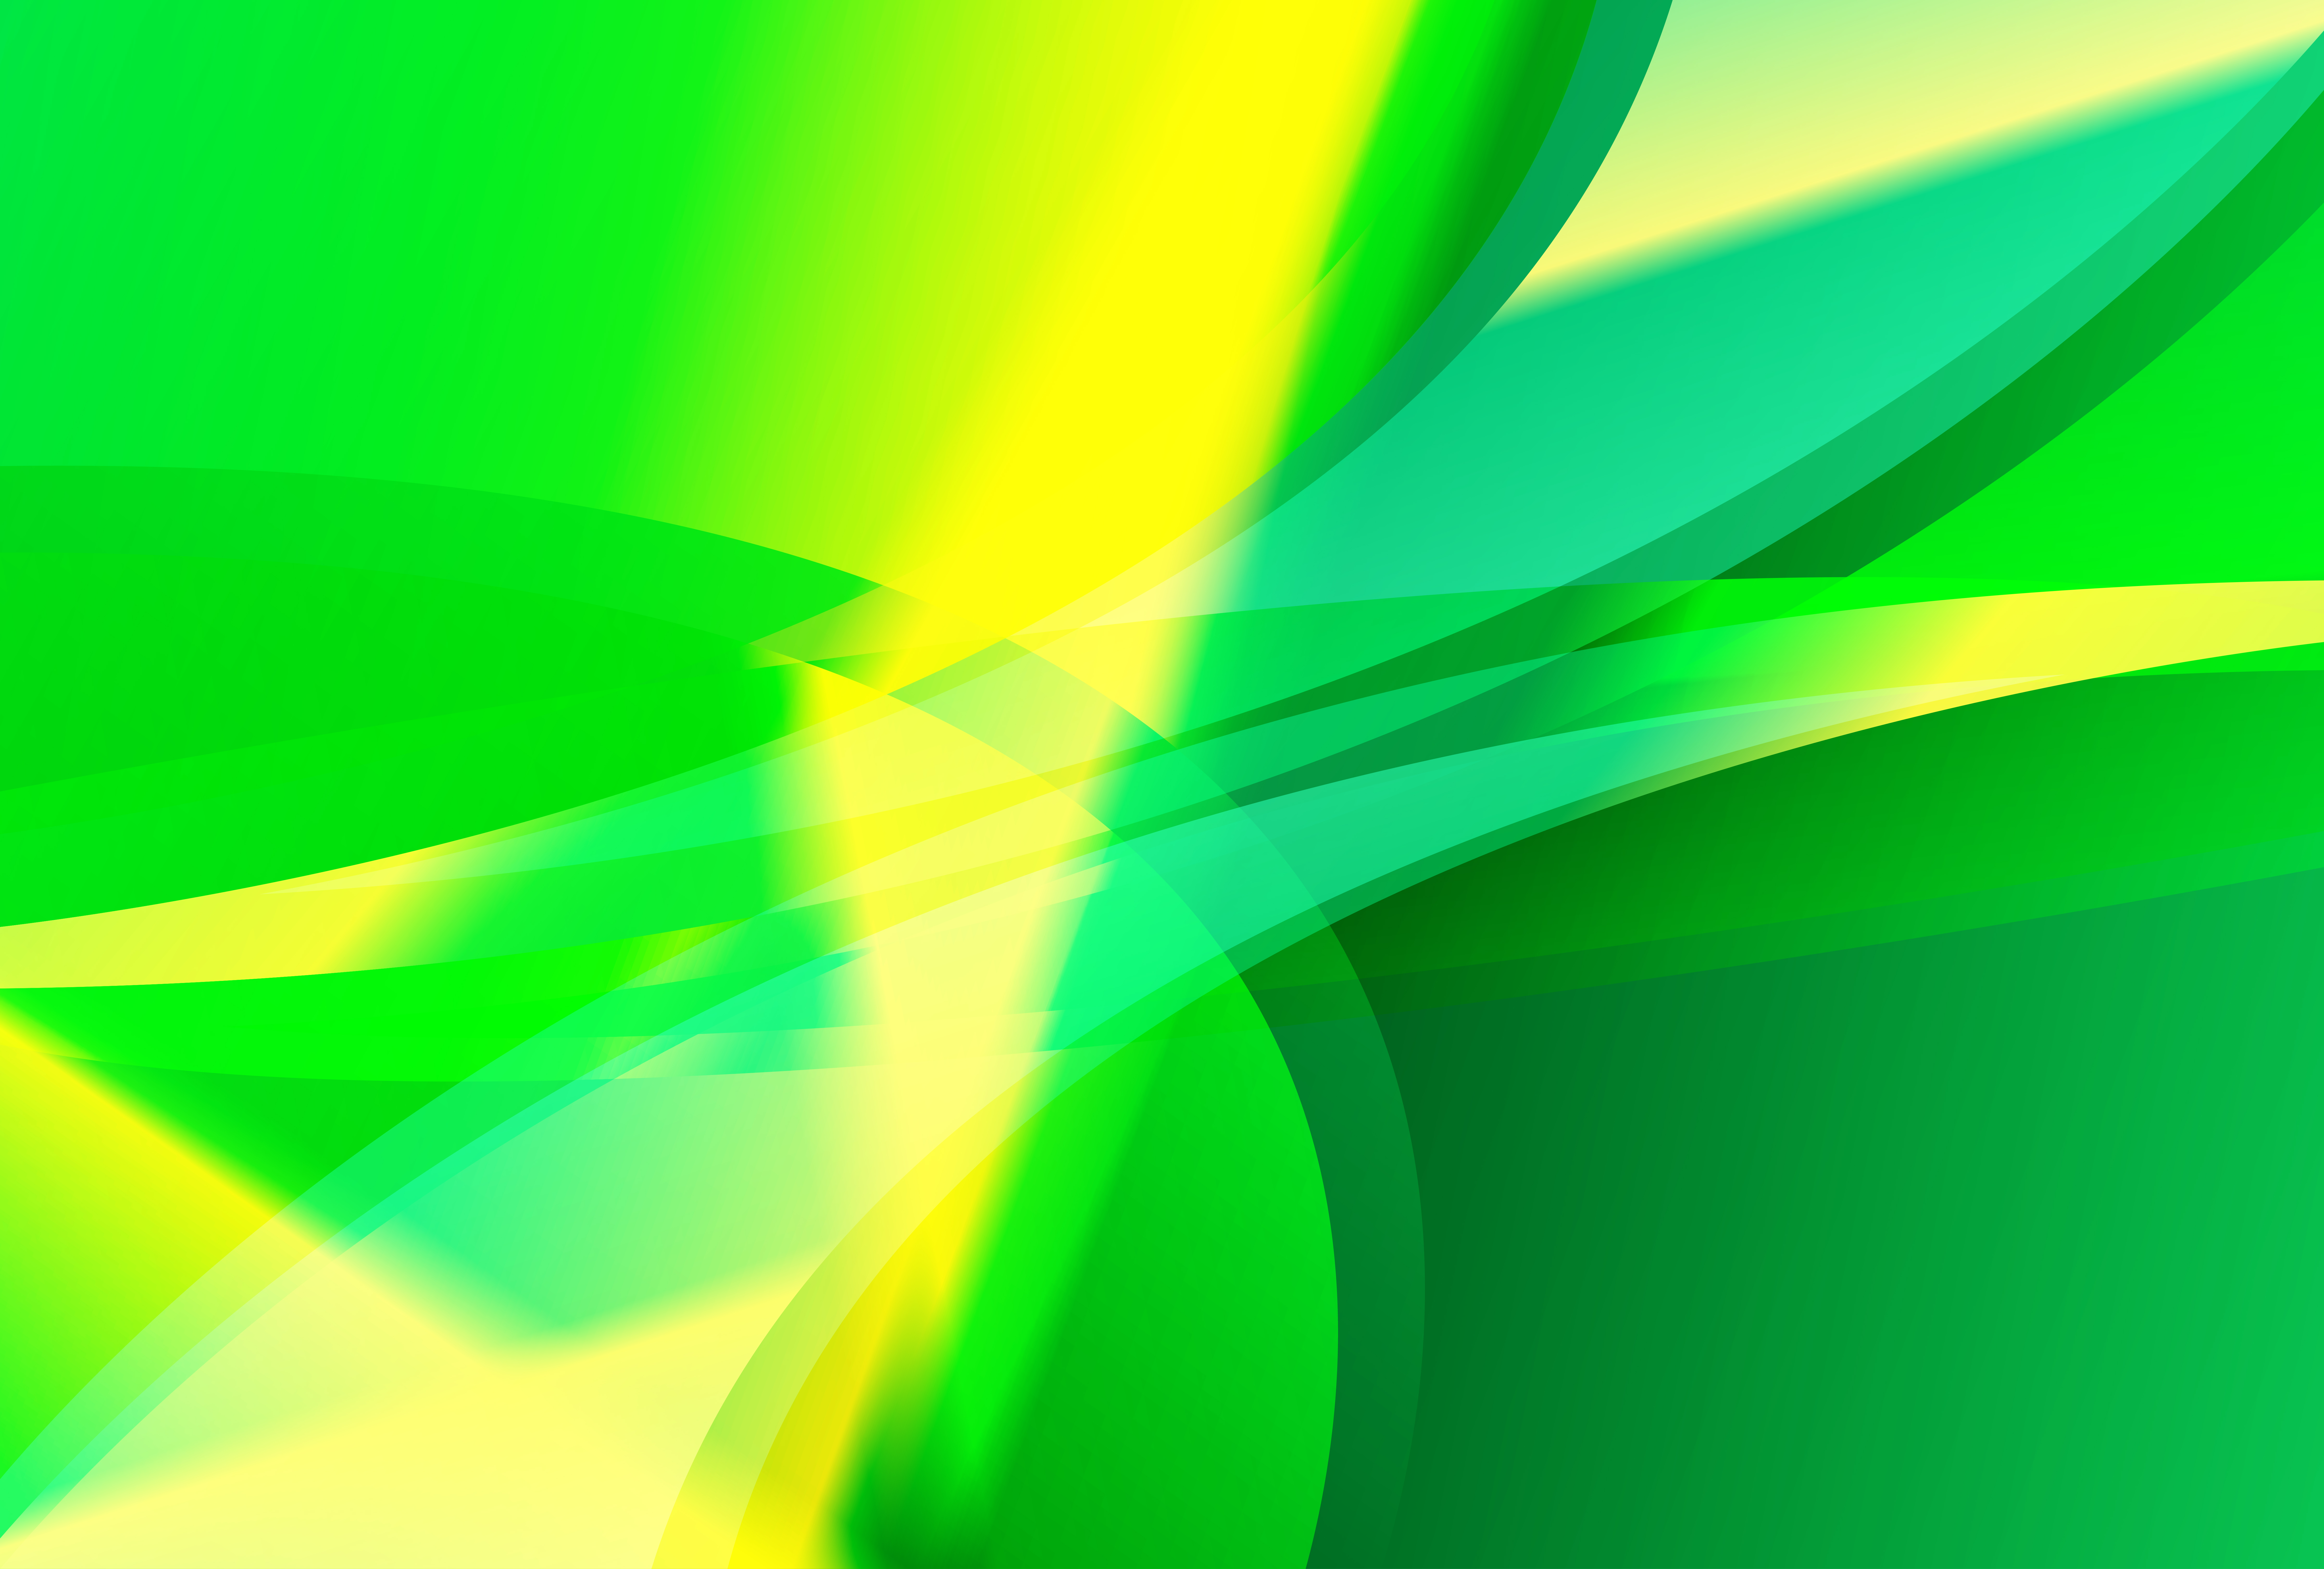 Vector sports shirt background image.yellow green gradient under